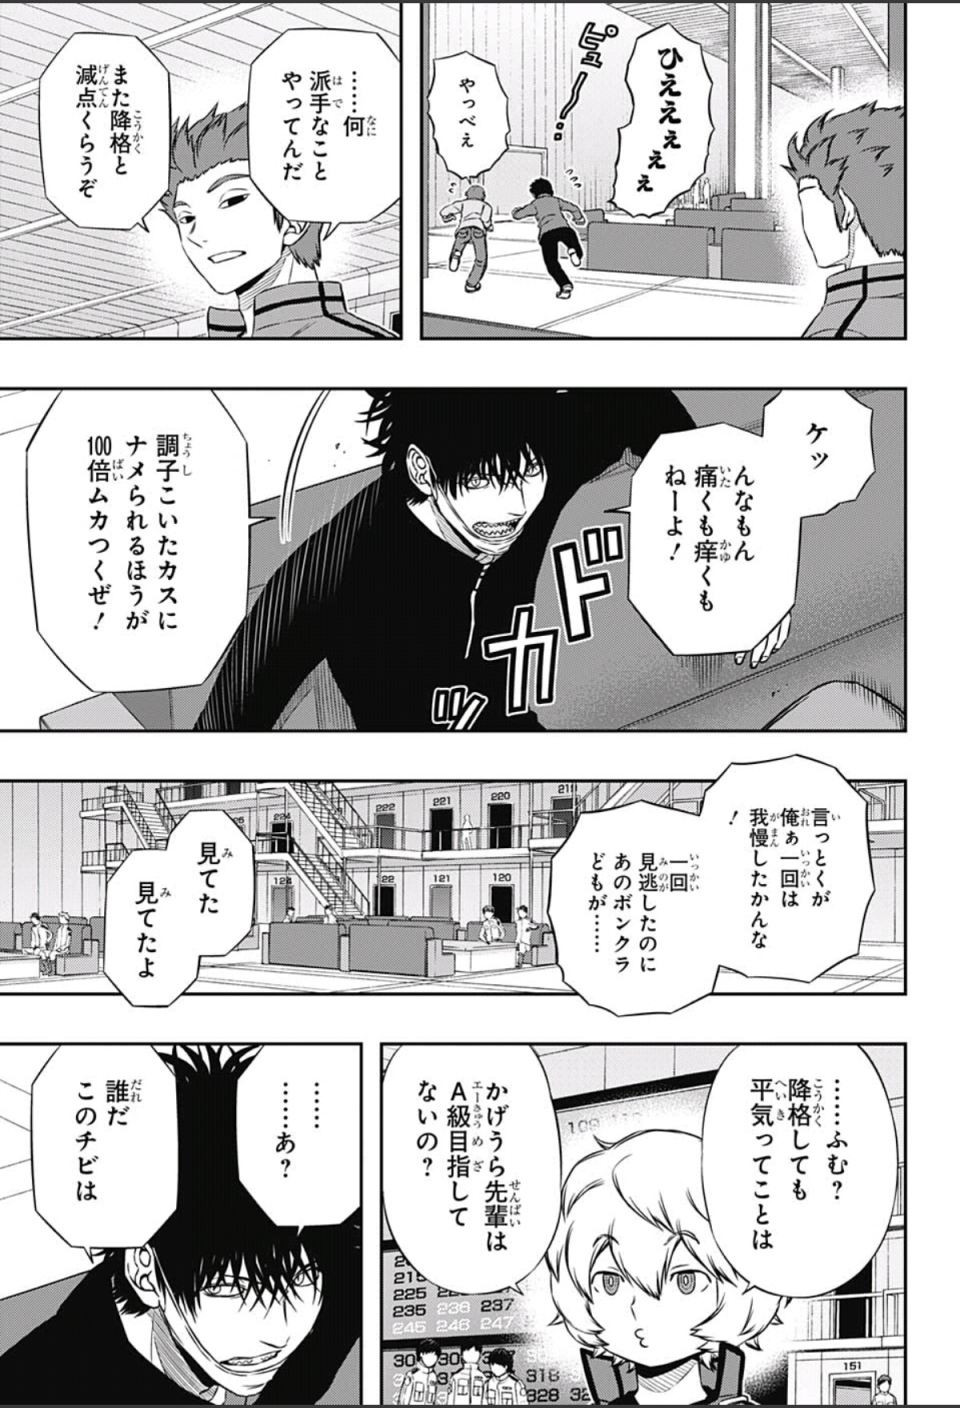 World Trigger - Chapter 109 - Page 3